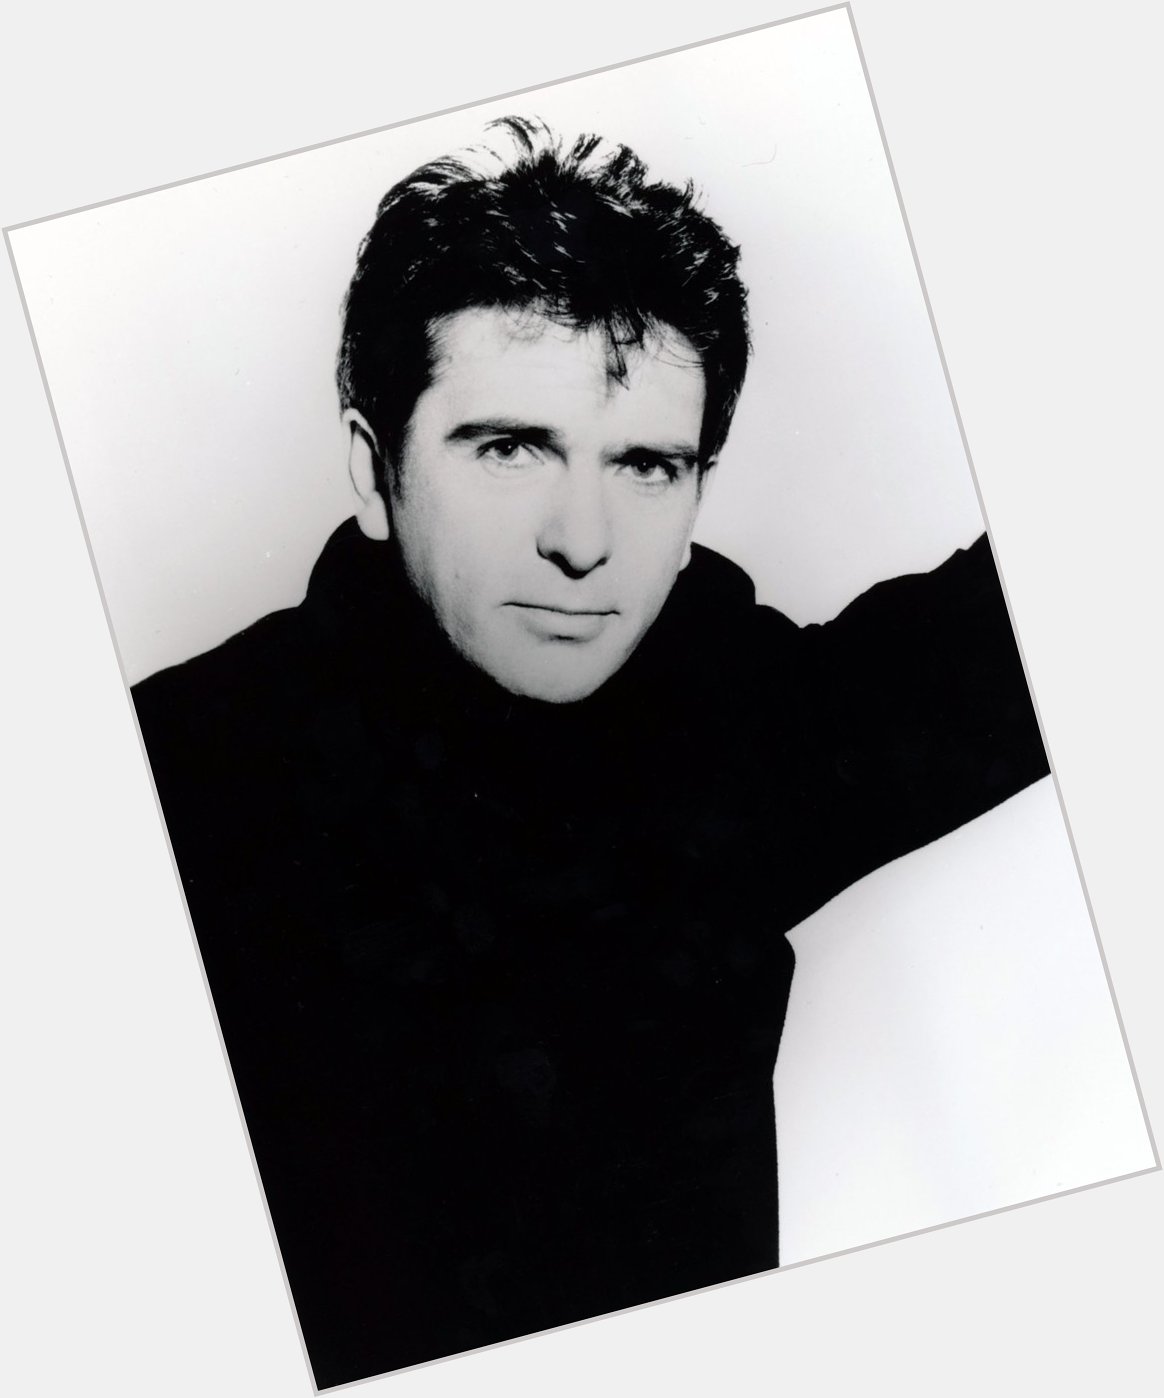 Happy birthday, Peter Gabriel! The former lead singer of Genesis turns 71 years old today. 